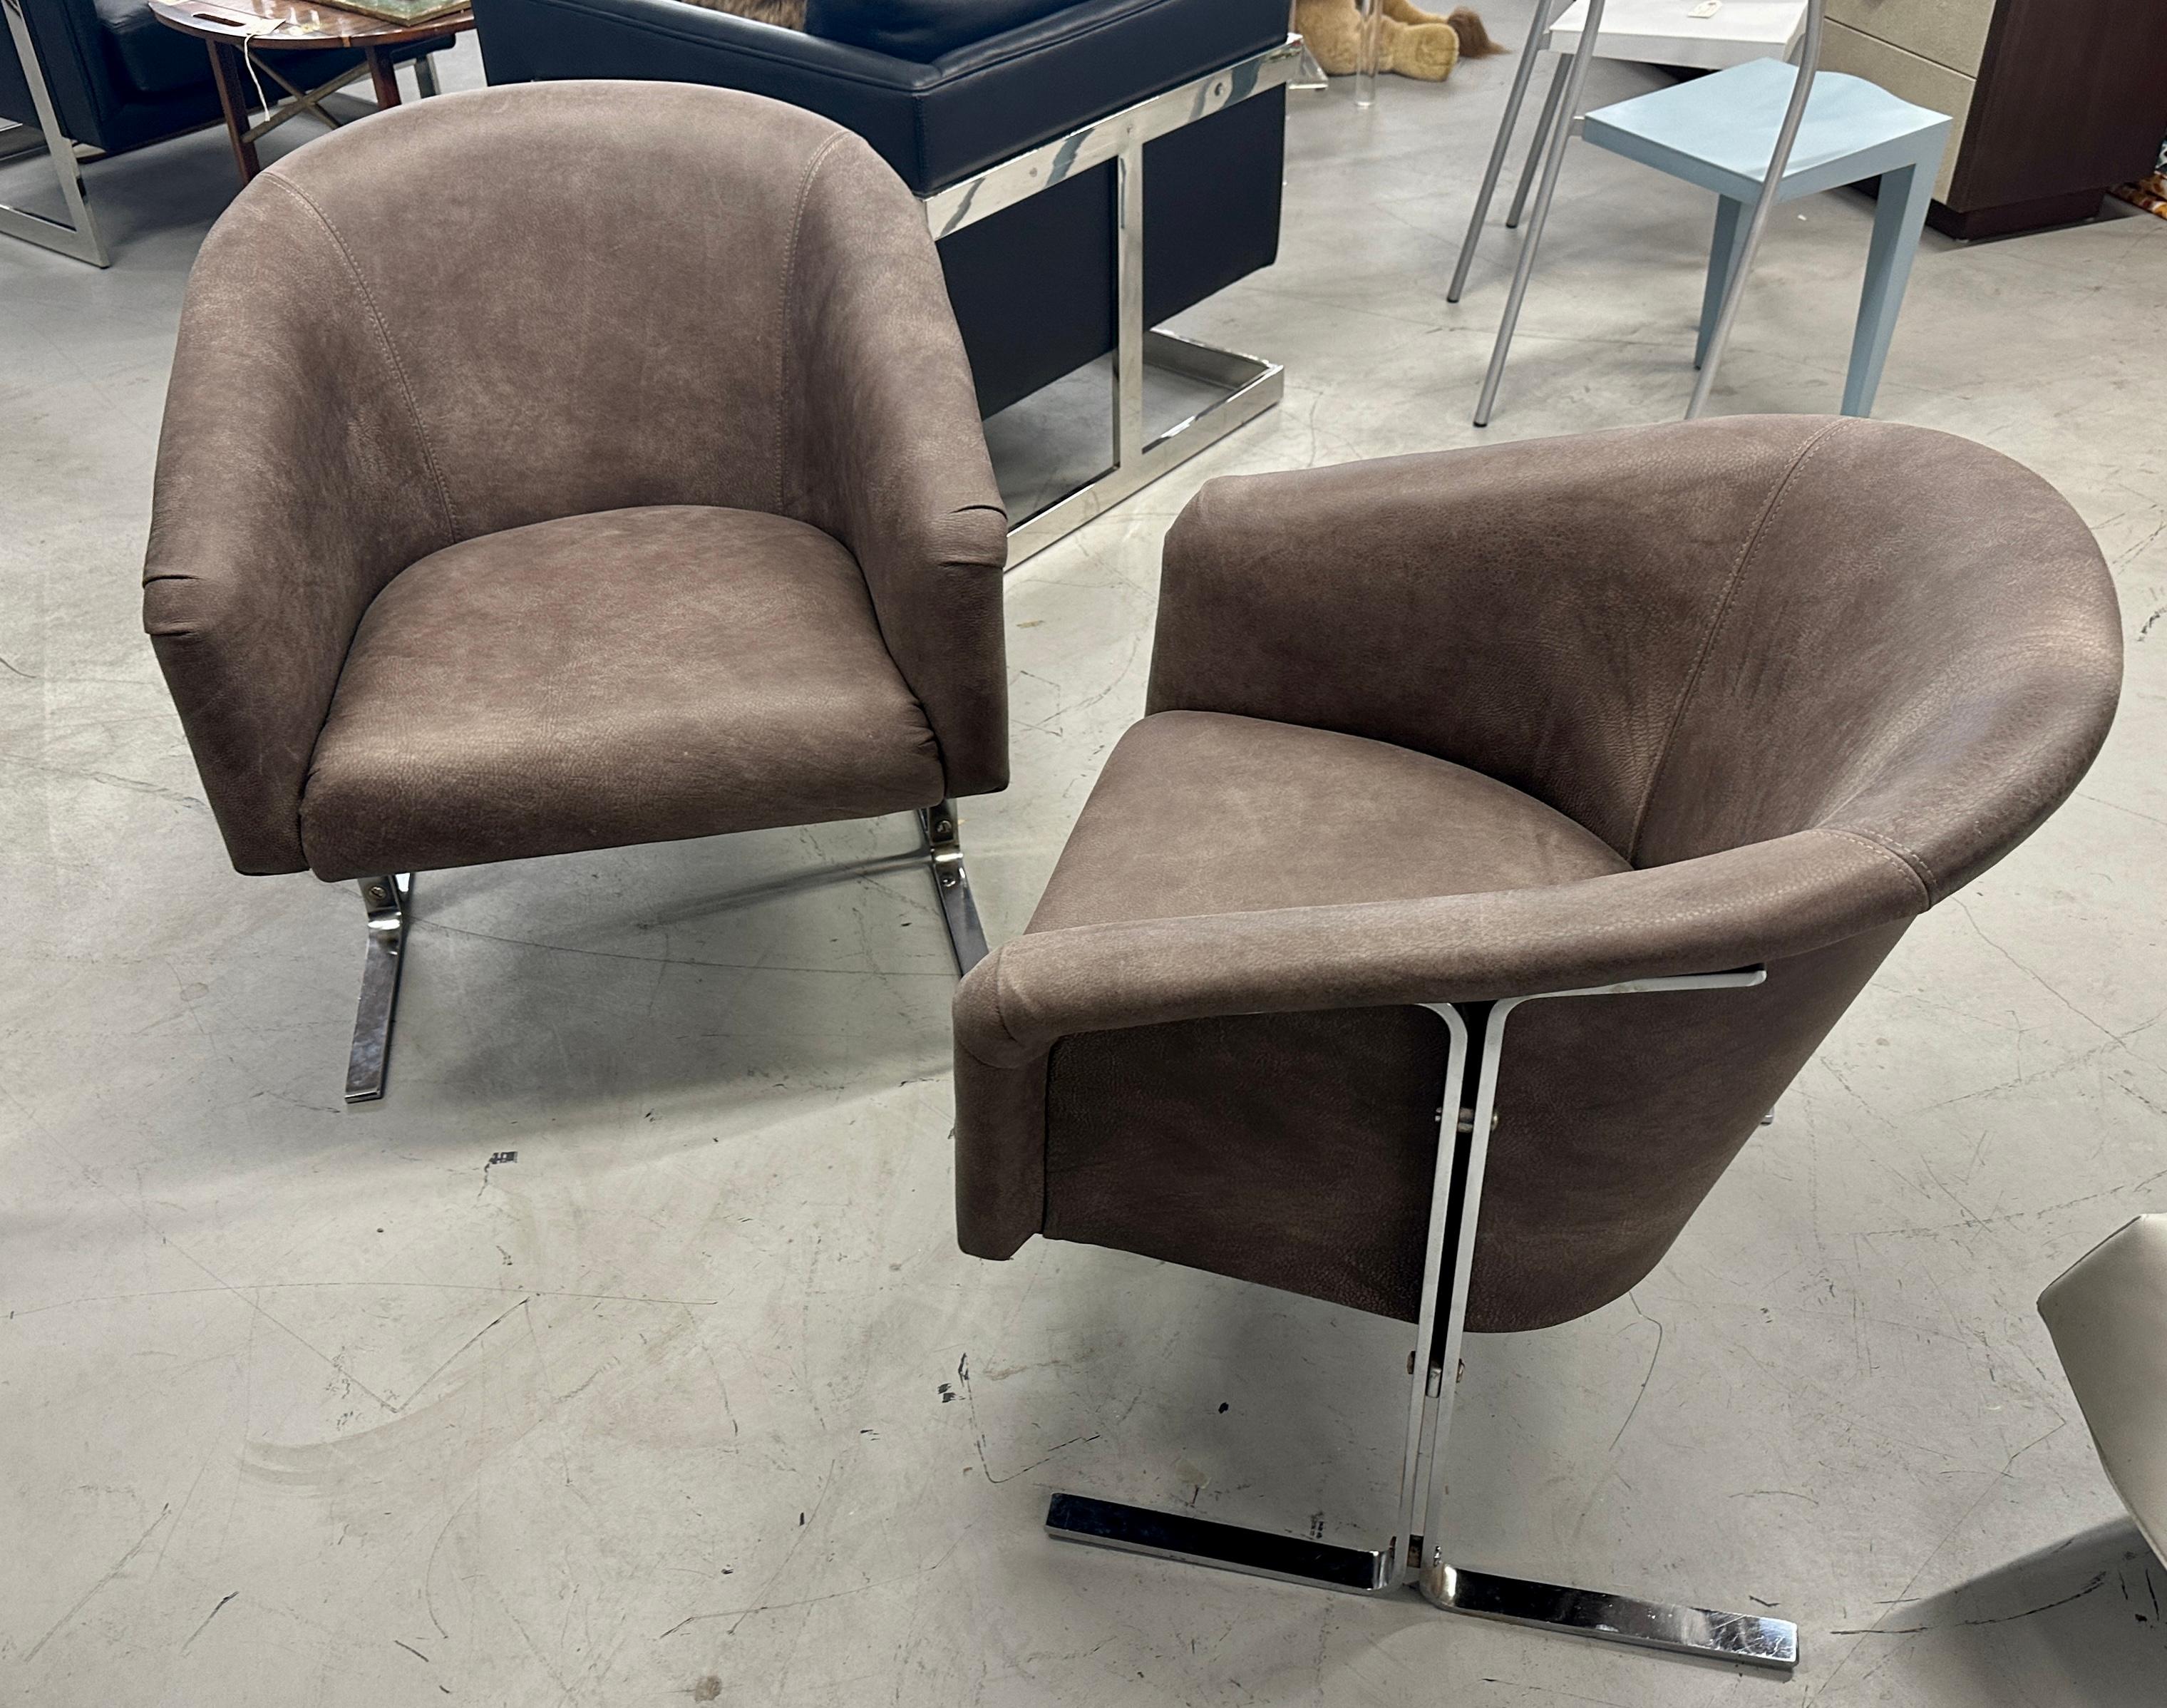 1970s Chromed Steel Leather Chairs For Sale 8